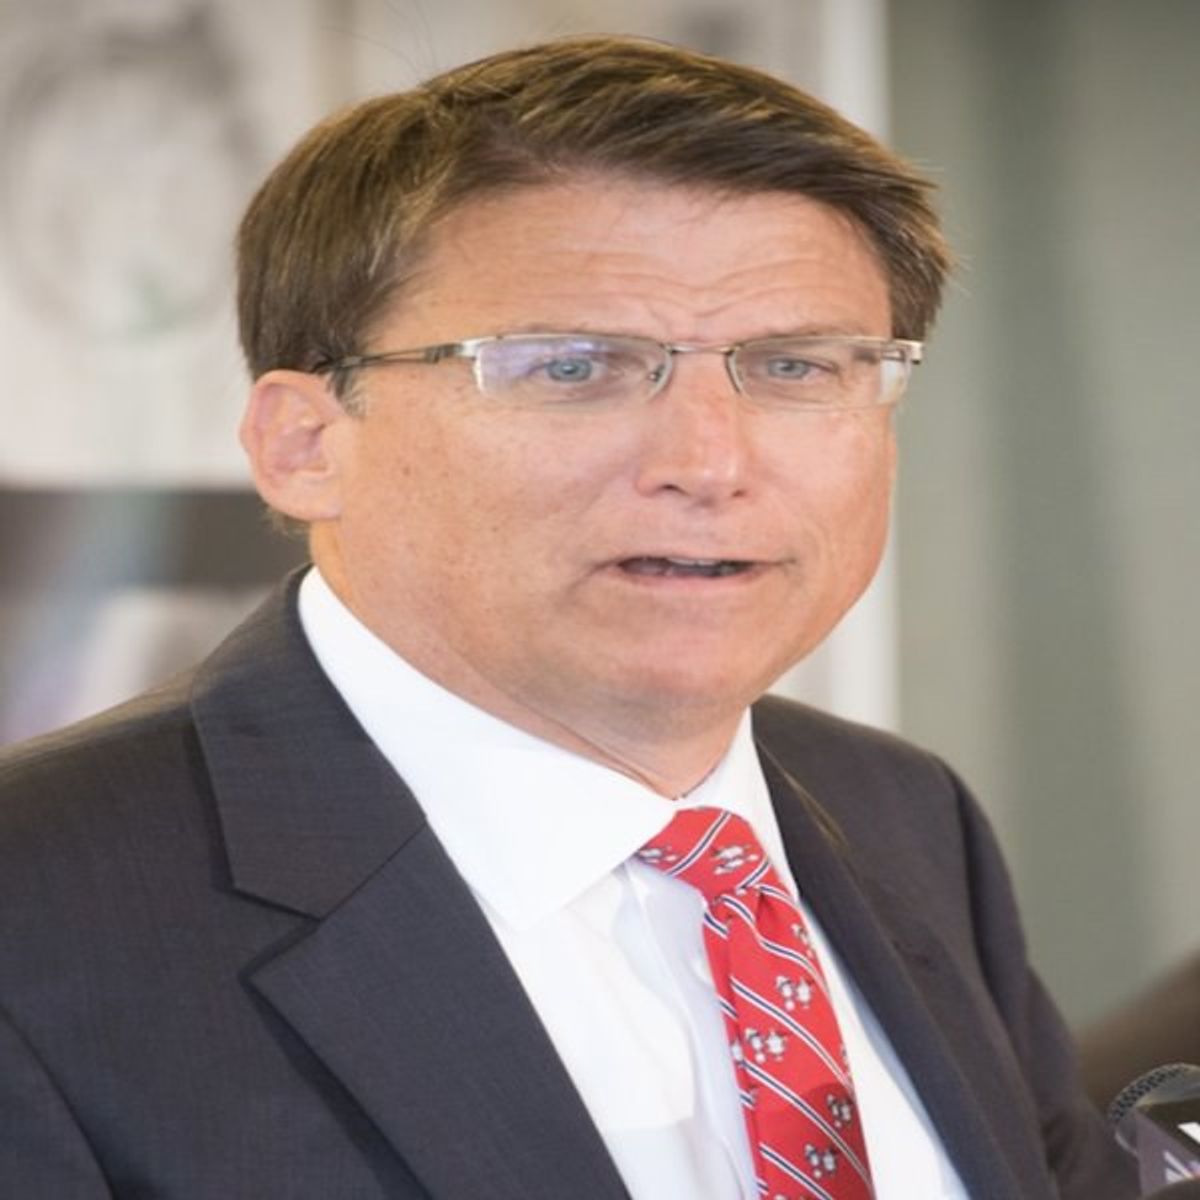 HB2 Proves Why McCrory Has No Business Being Governor